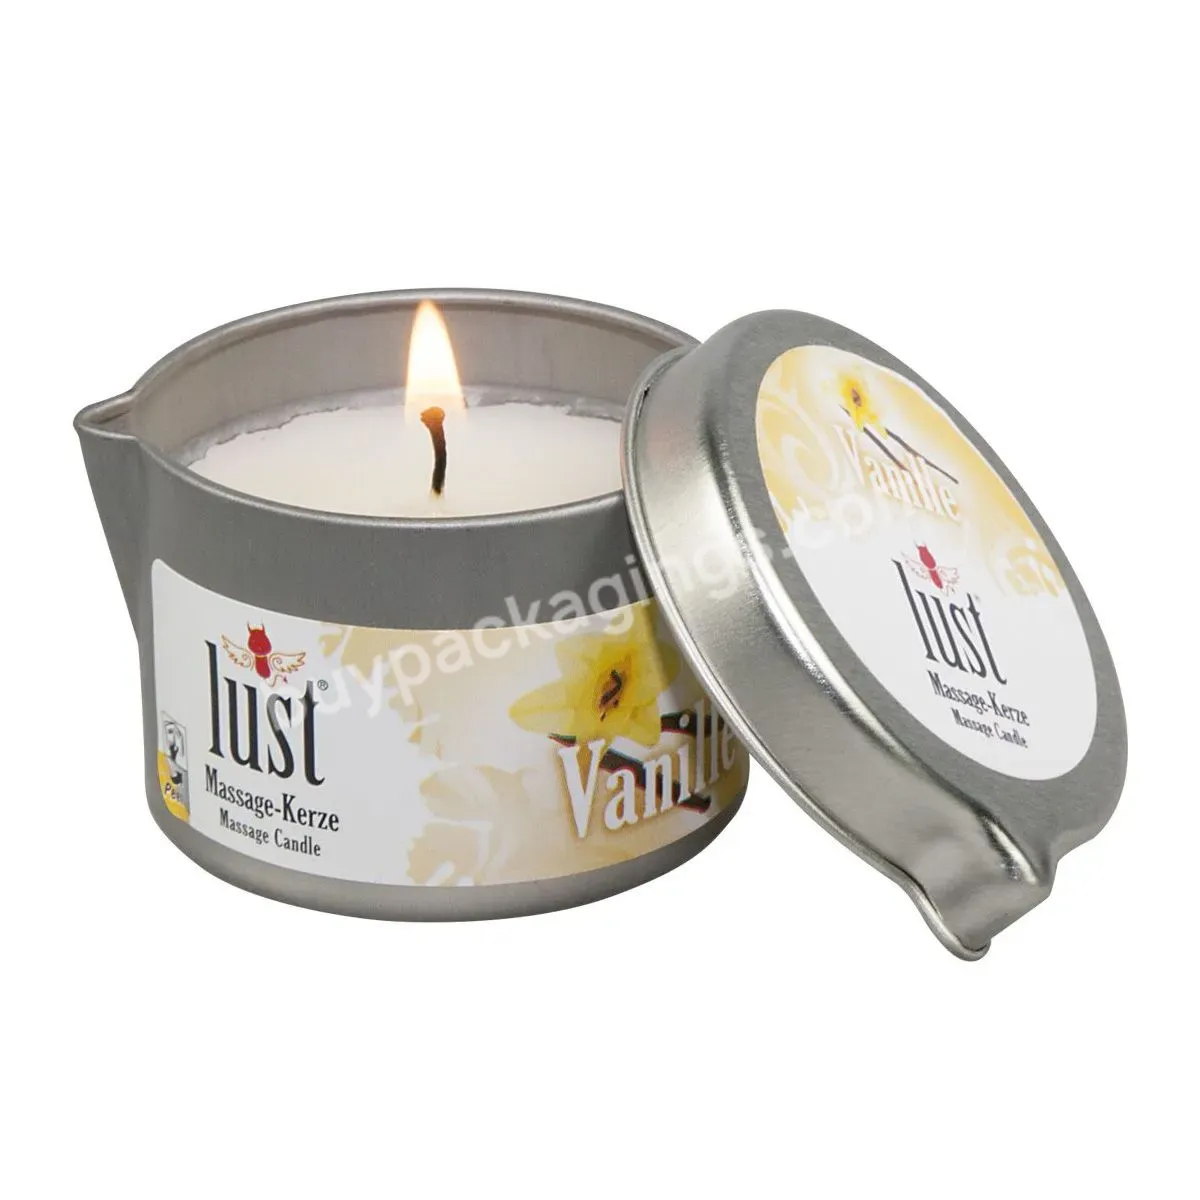 Empty Massage Candle Tin With Spout 8 Oz Massage Oil Jar With Pouring Spout Open Mouth Candle Jar